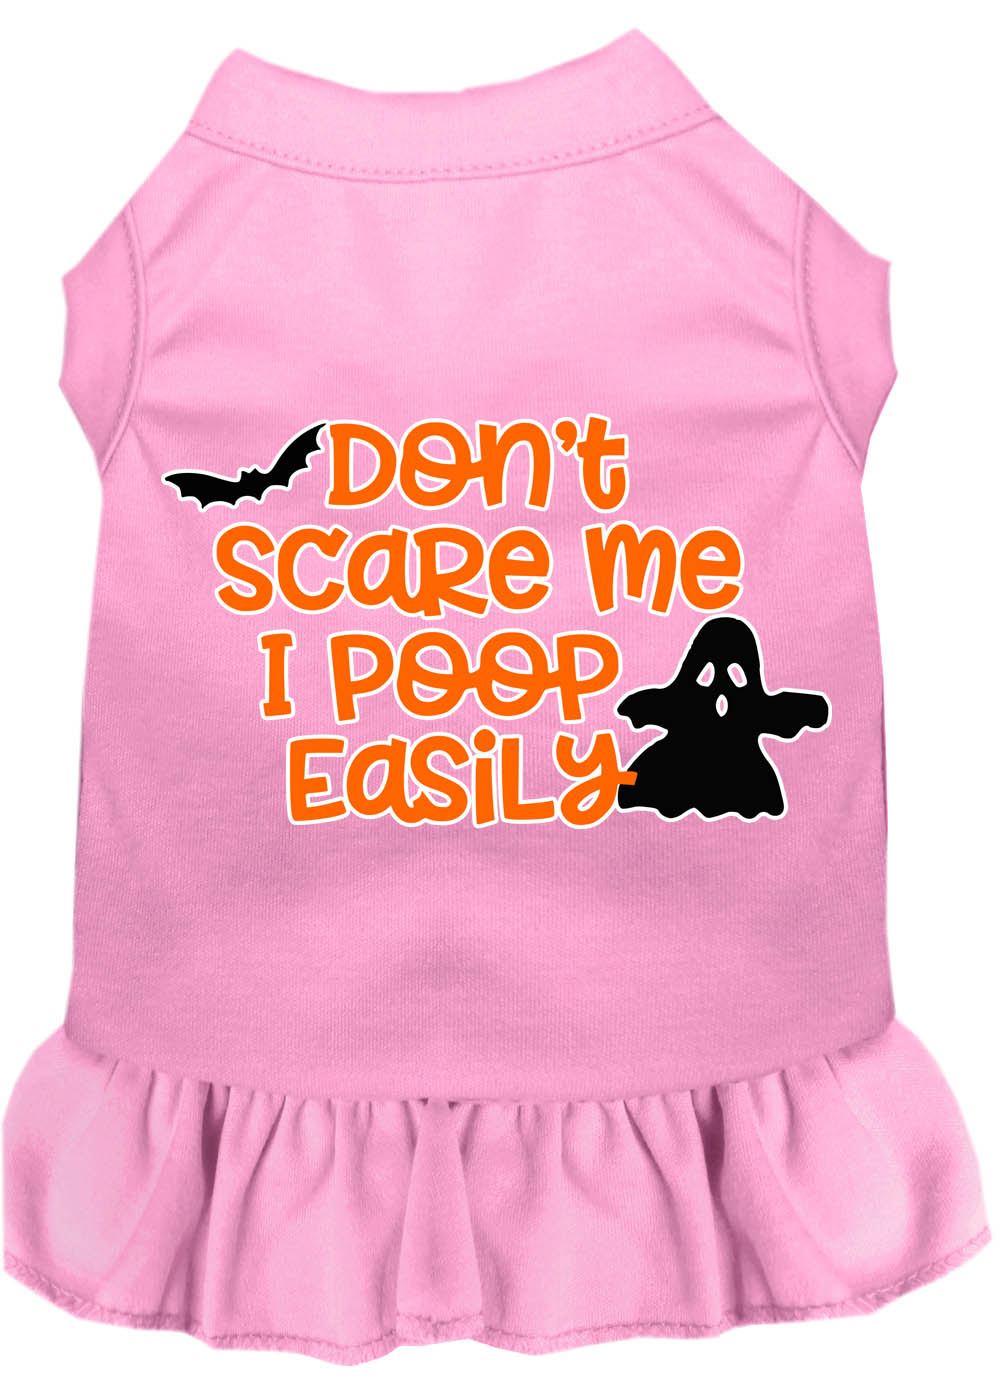 Don't Scare Me, Poops Easily Screen Print Dog Dress Light Pink XL